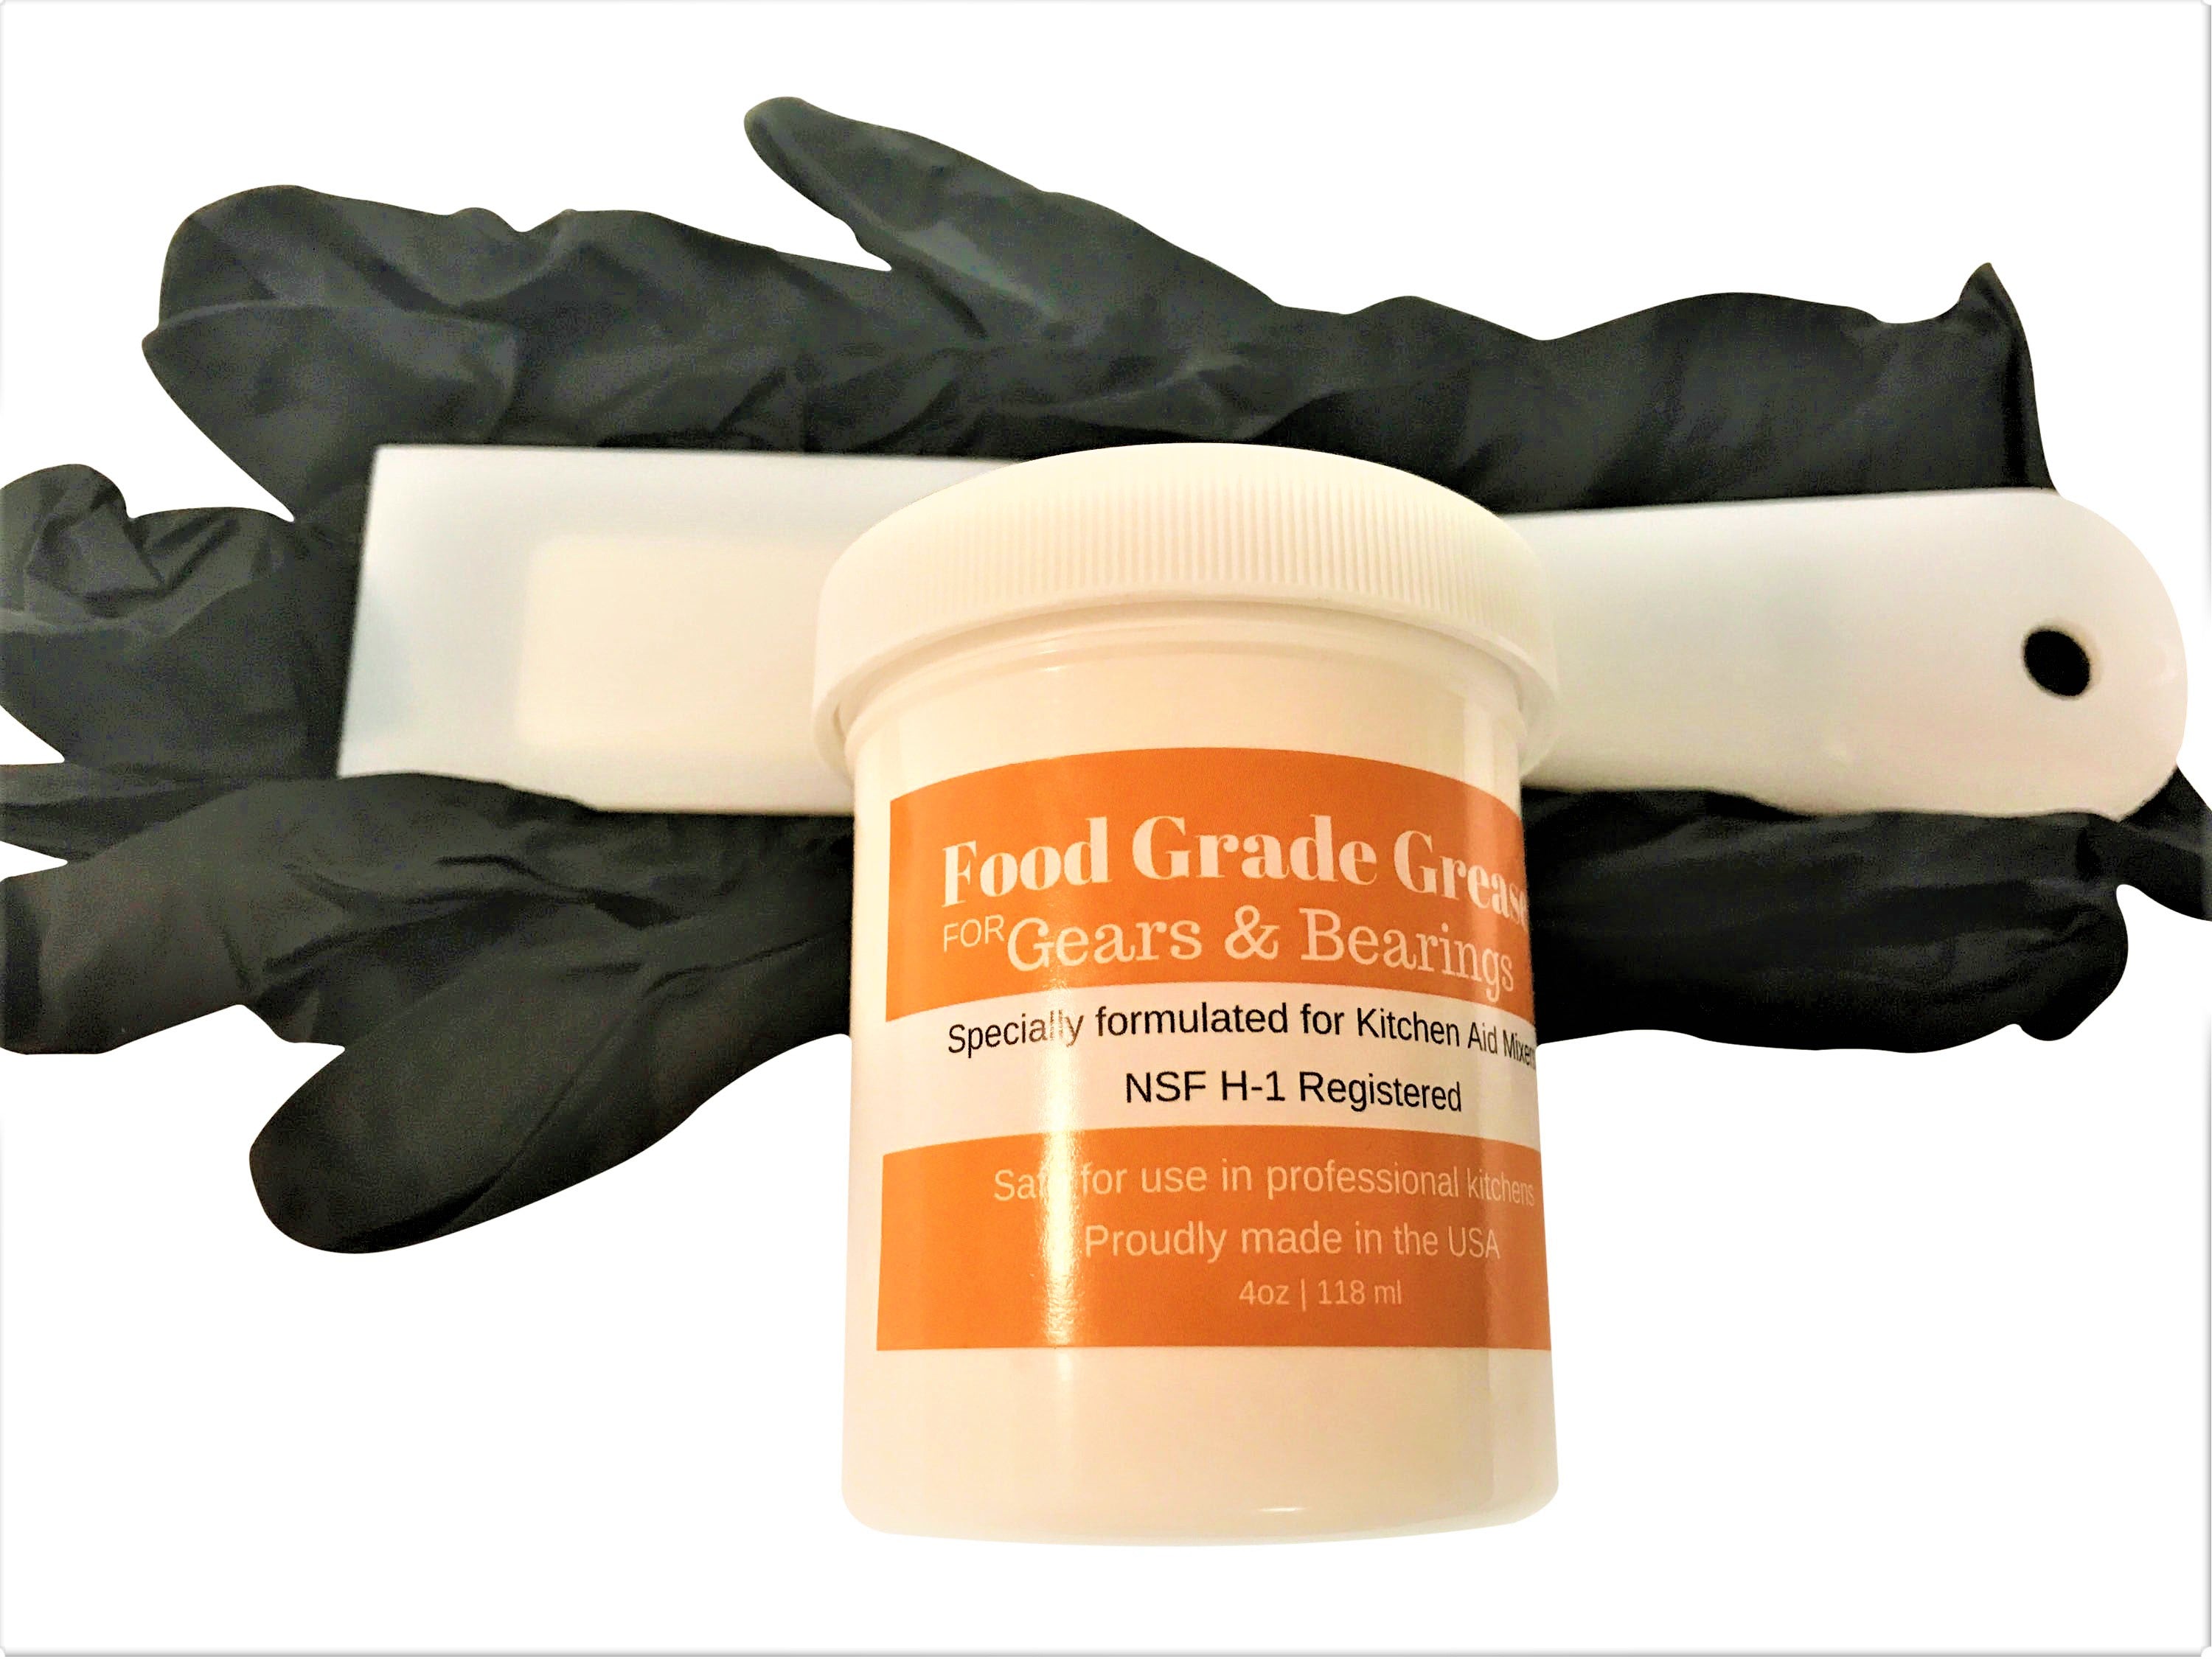 Impresa Products 4 Oz Food Grade Grease for Stand Mixer